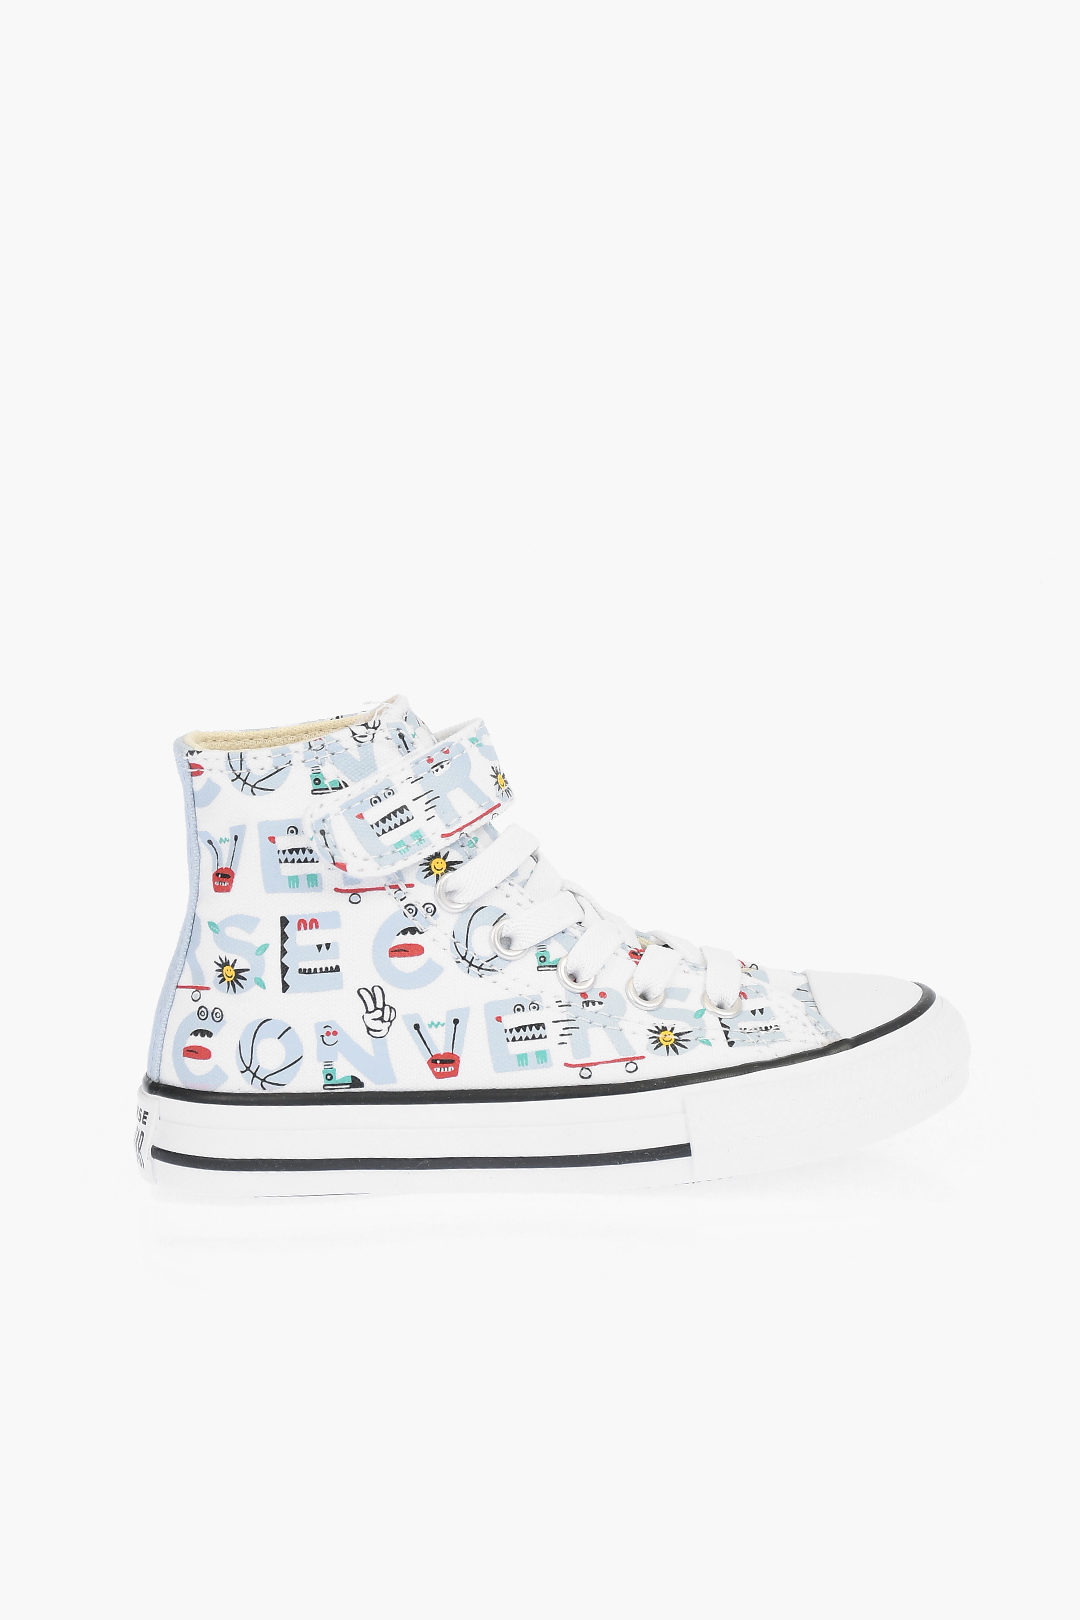 Converse KIDS CHUCK TAYLOR ALL STAR printed high top sneakers unisex  children boys girls - Glamood Outlet